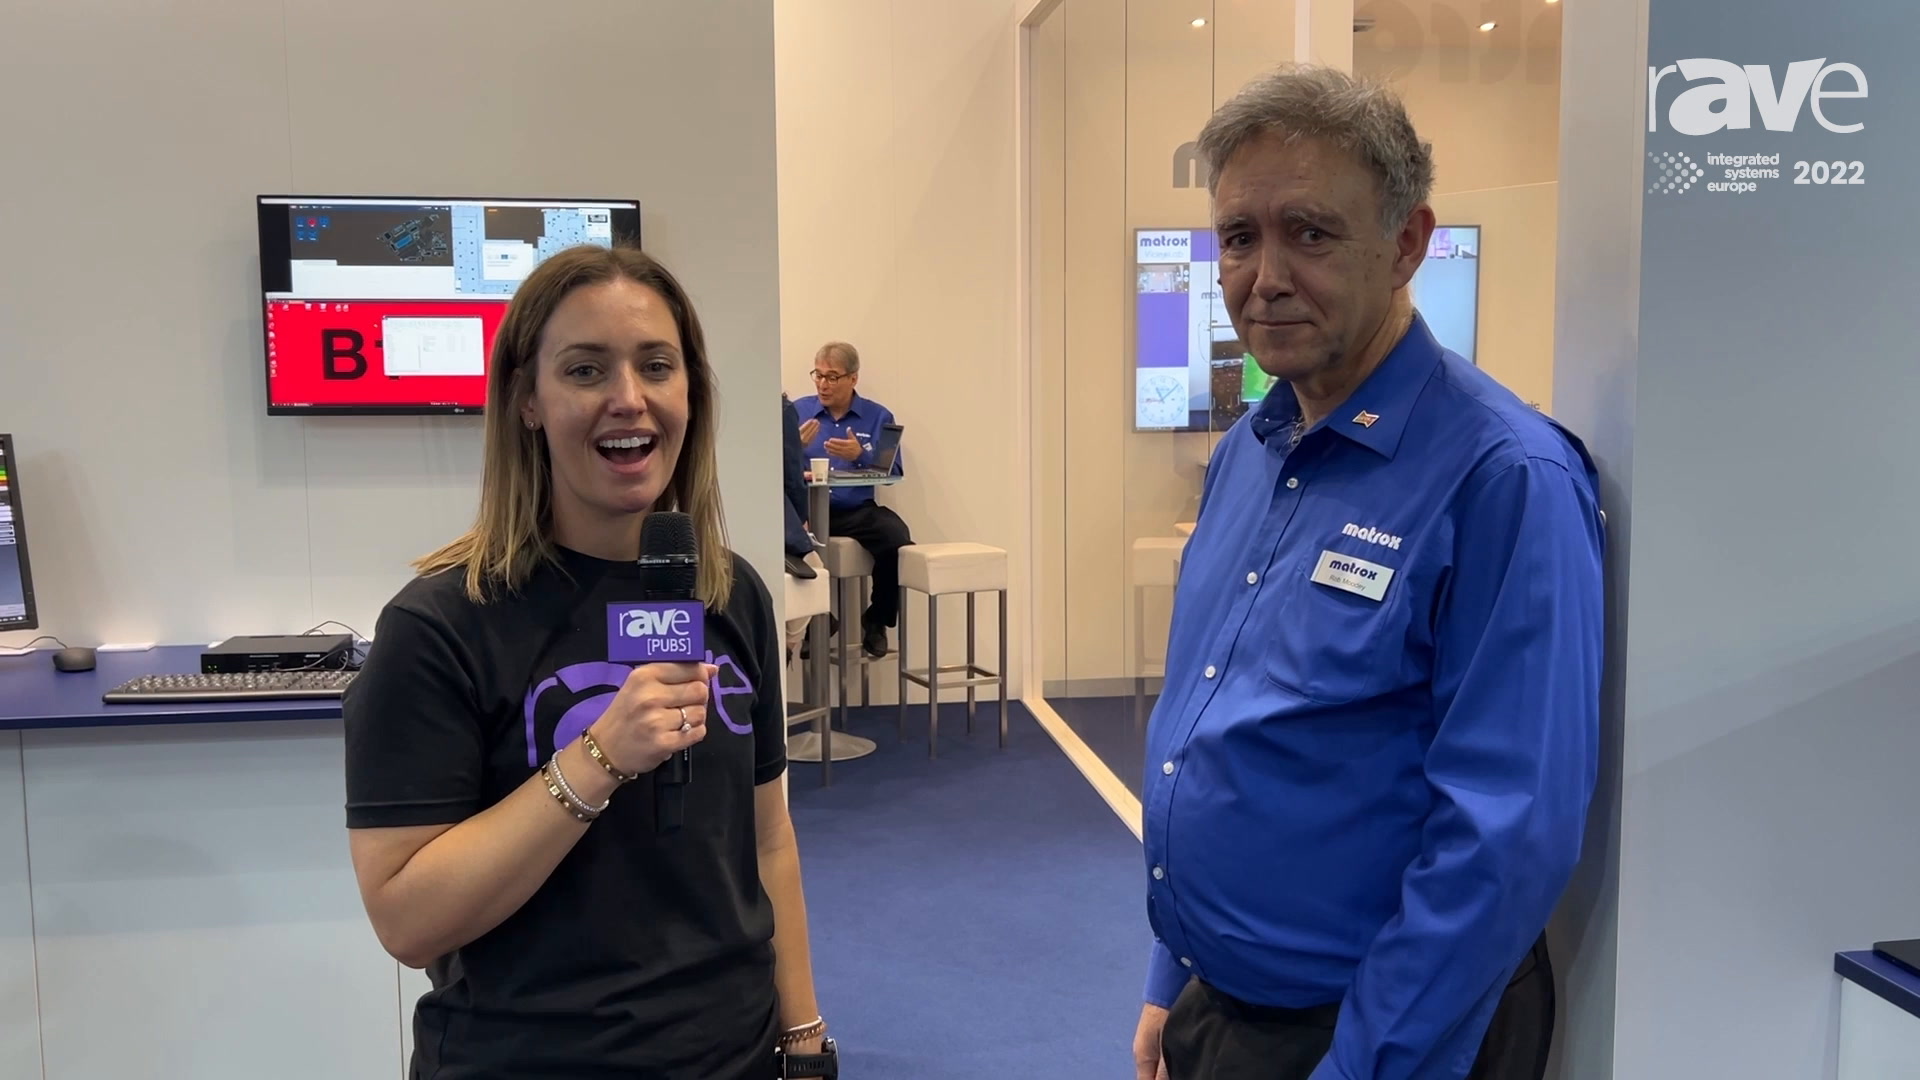 ISE 2022: Matrox Gives Emily Dean an ISE 2022 Booth Tour Featuring AV-over-IP Demo and ConvertIP